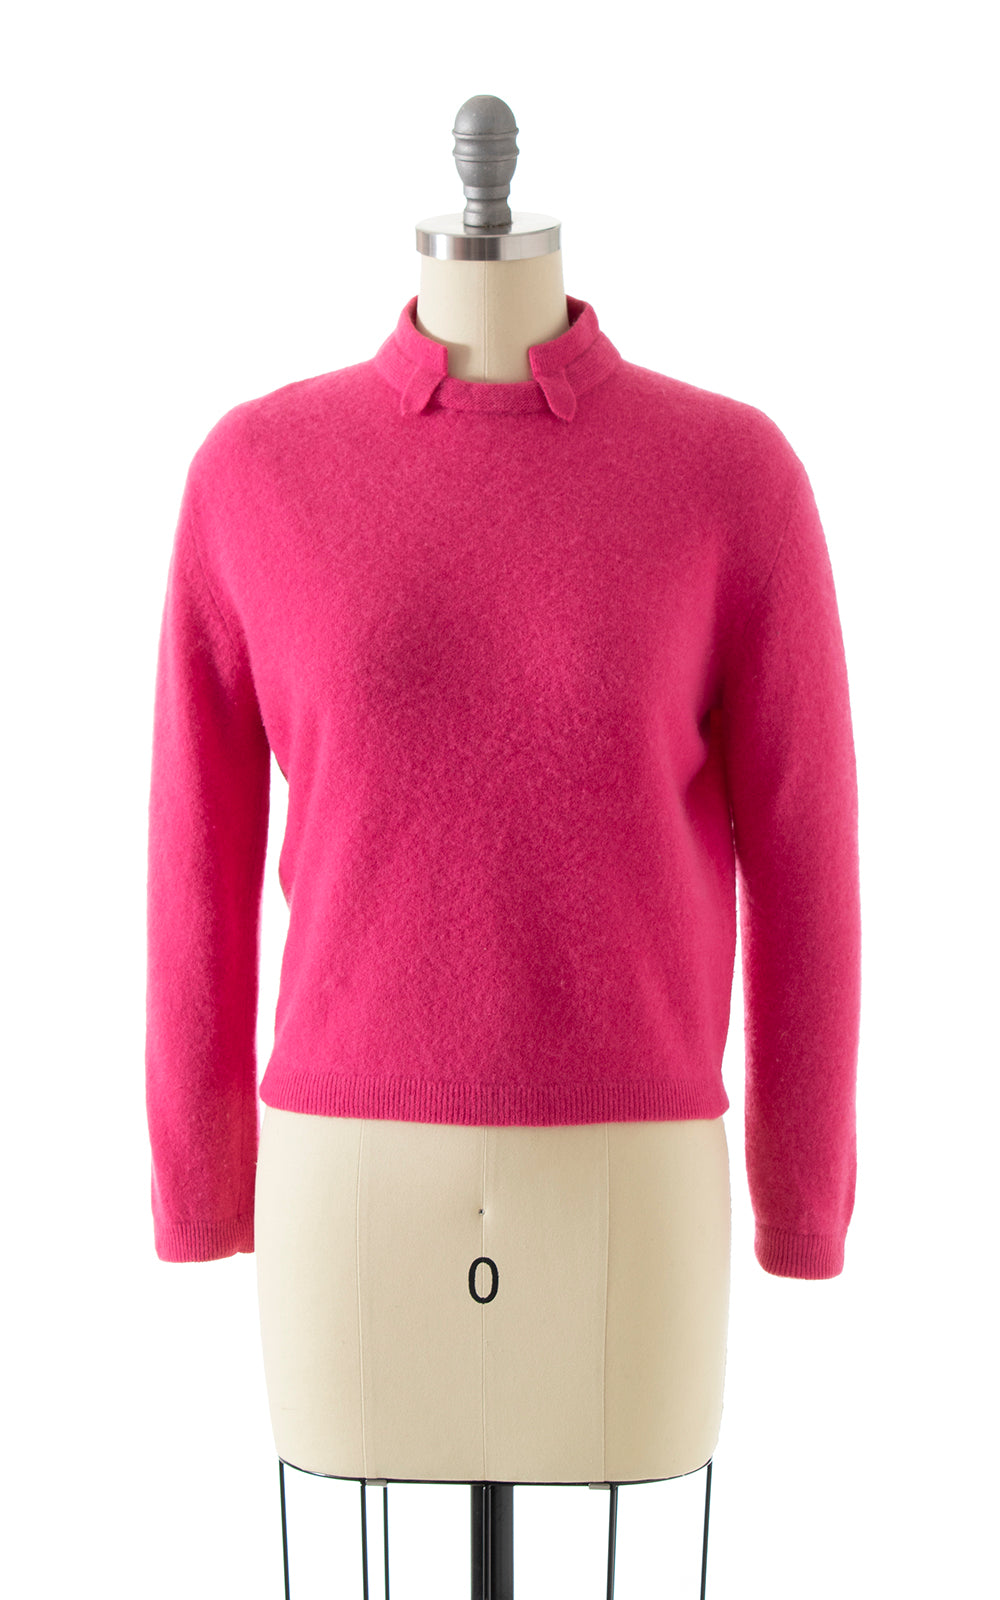 Vintage 1950s Hot Pink Knit Wool Angora Pullover Sweater Top  Birthday Life Vintage